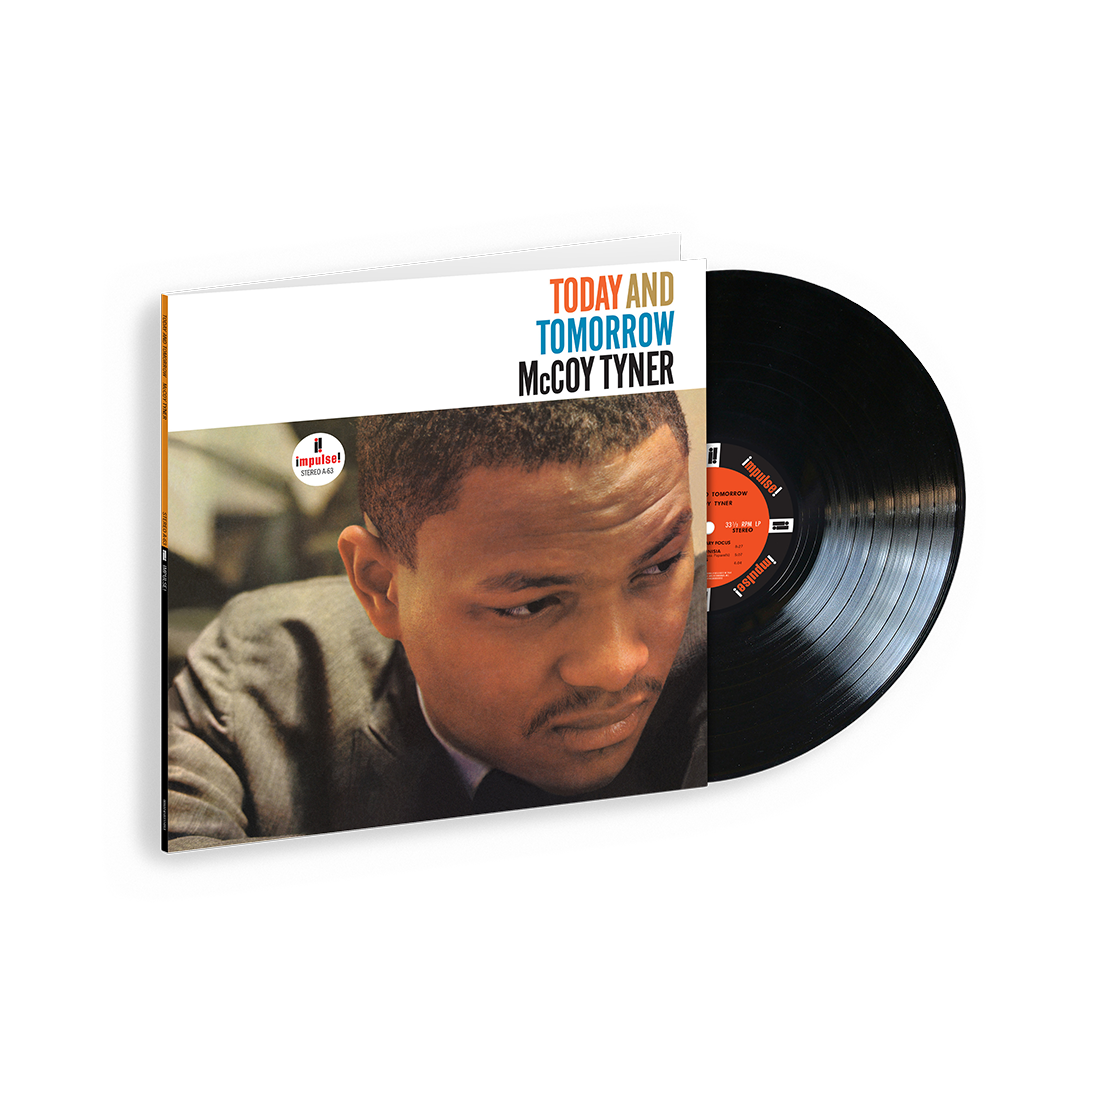 McCoy Tyner - Today And Tomorrow (Verve By Request): Vinyl LP